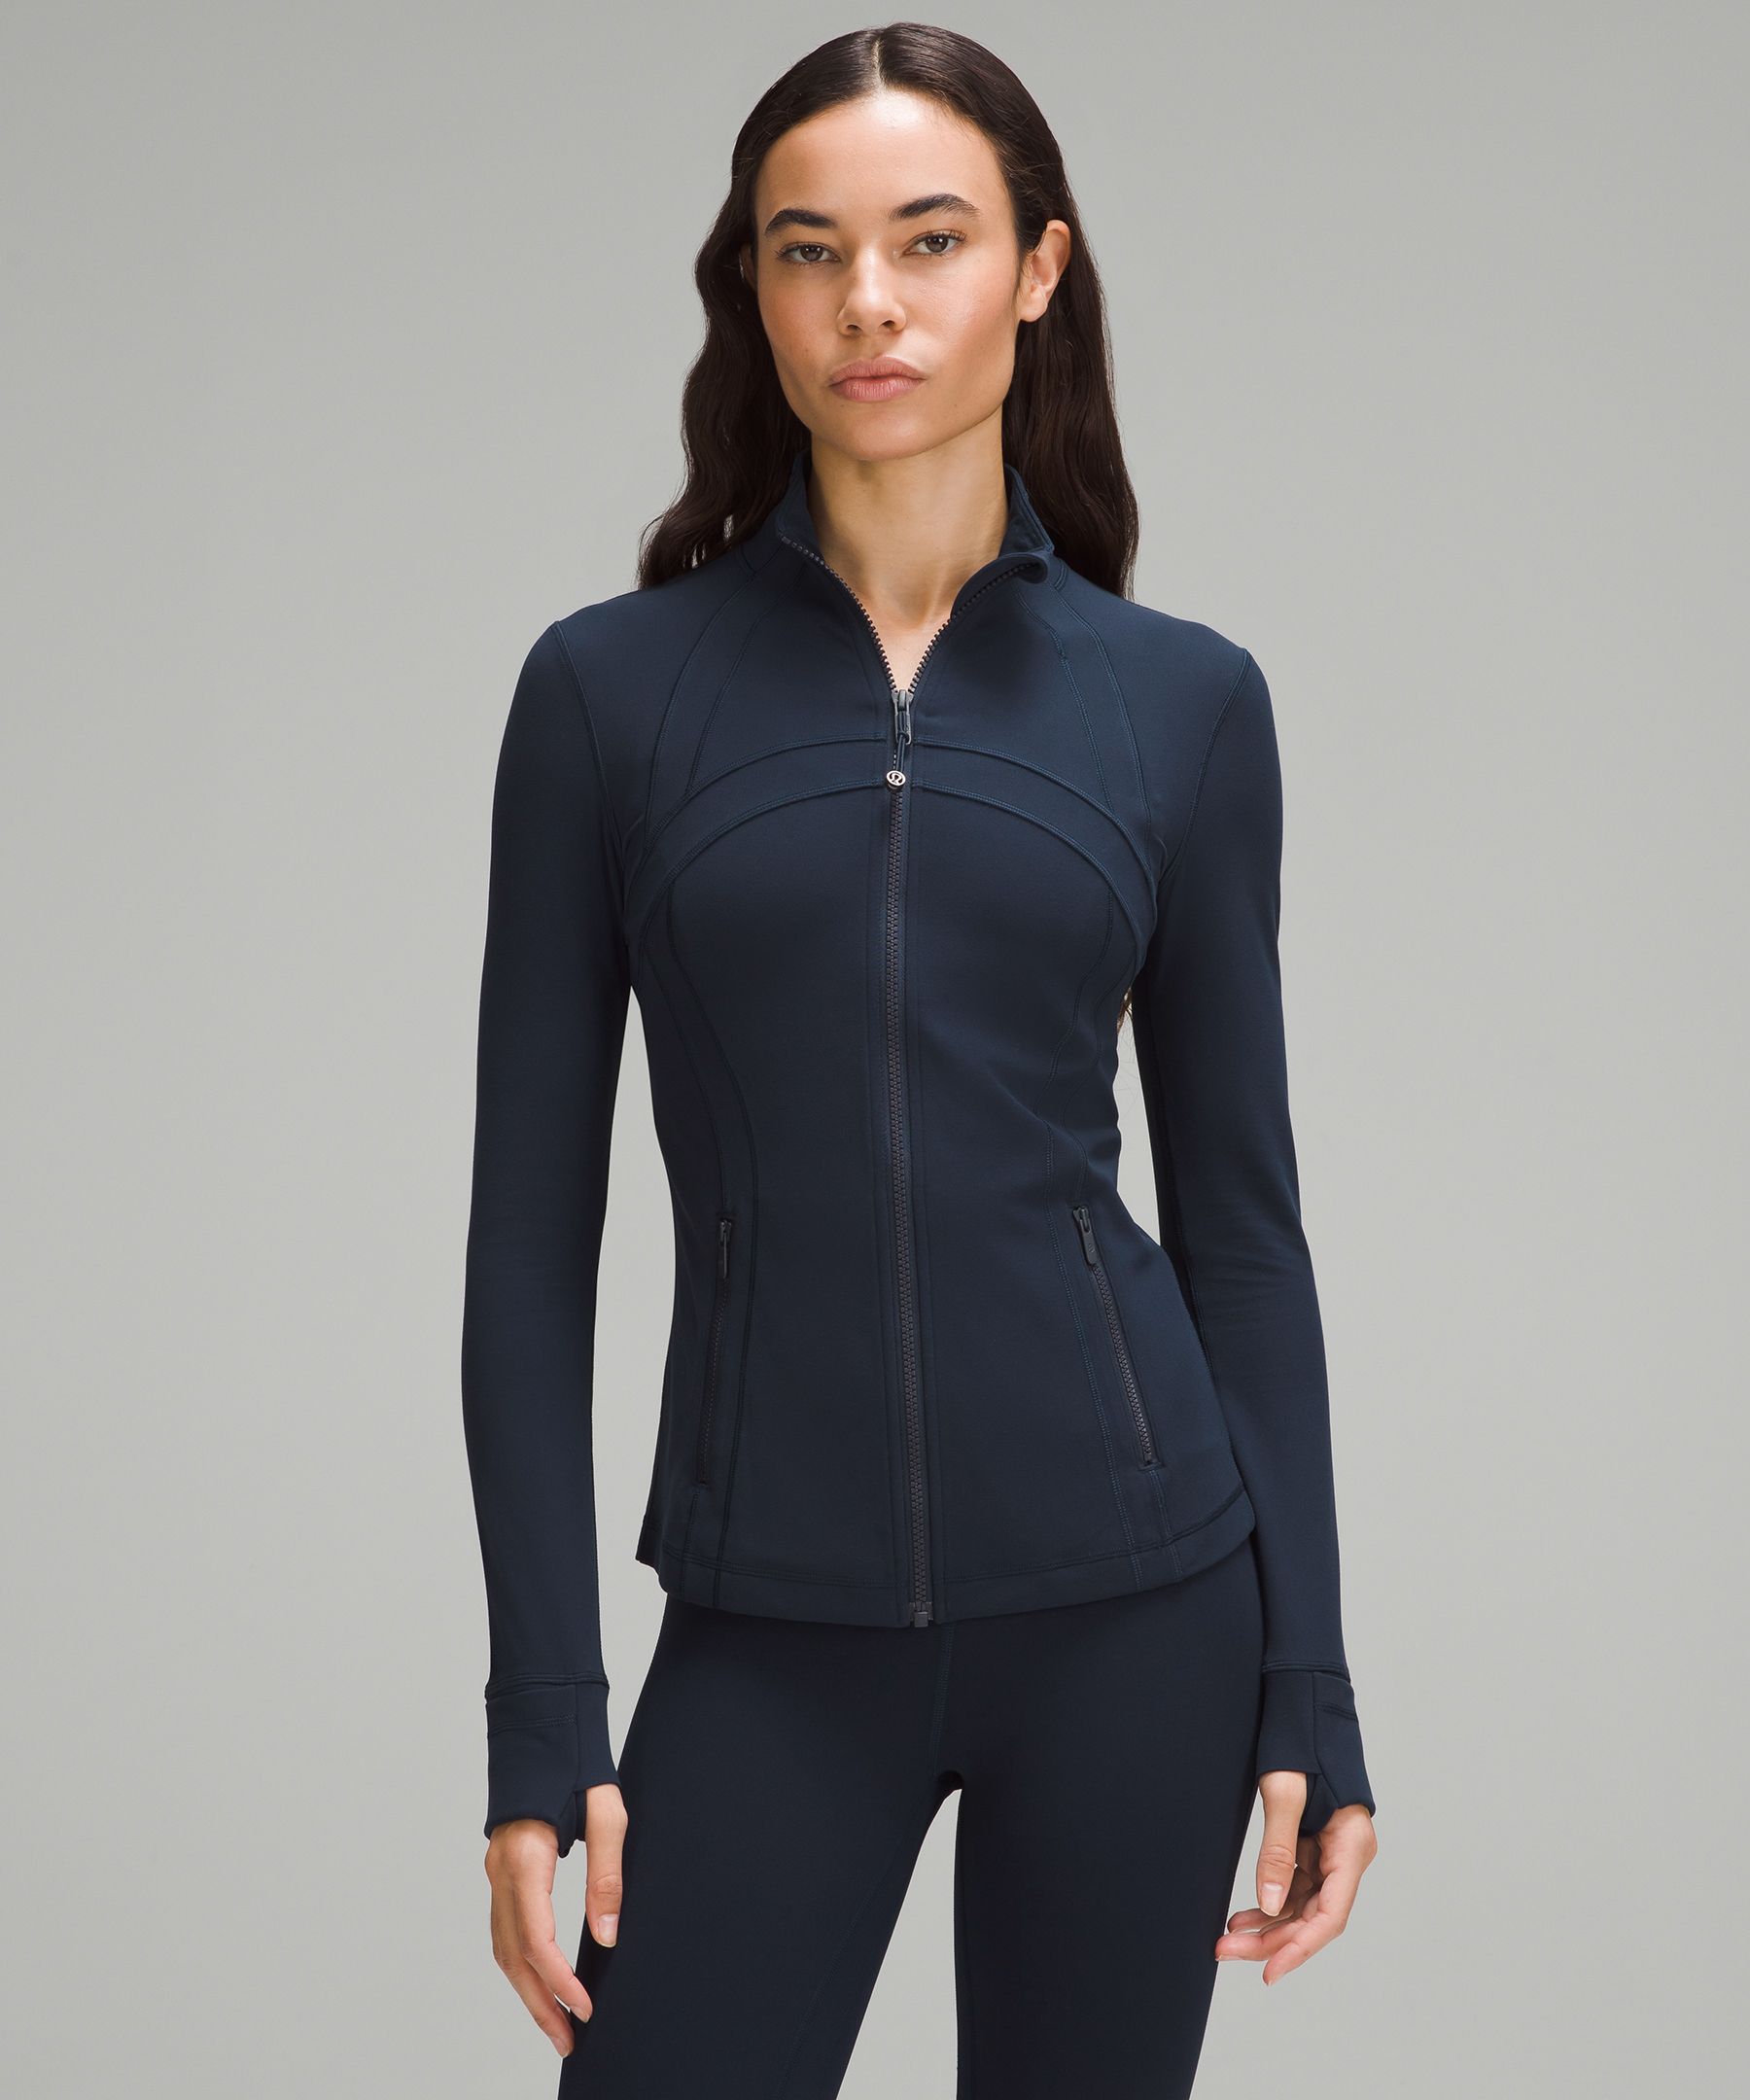 Casual Lululemon Fanatic – Love high quality athleisure that's functional